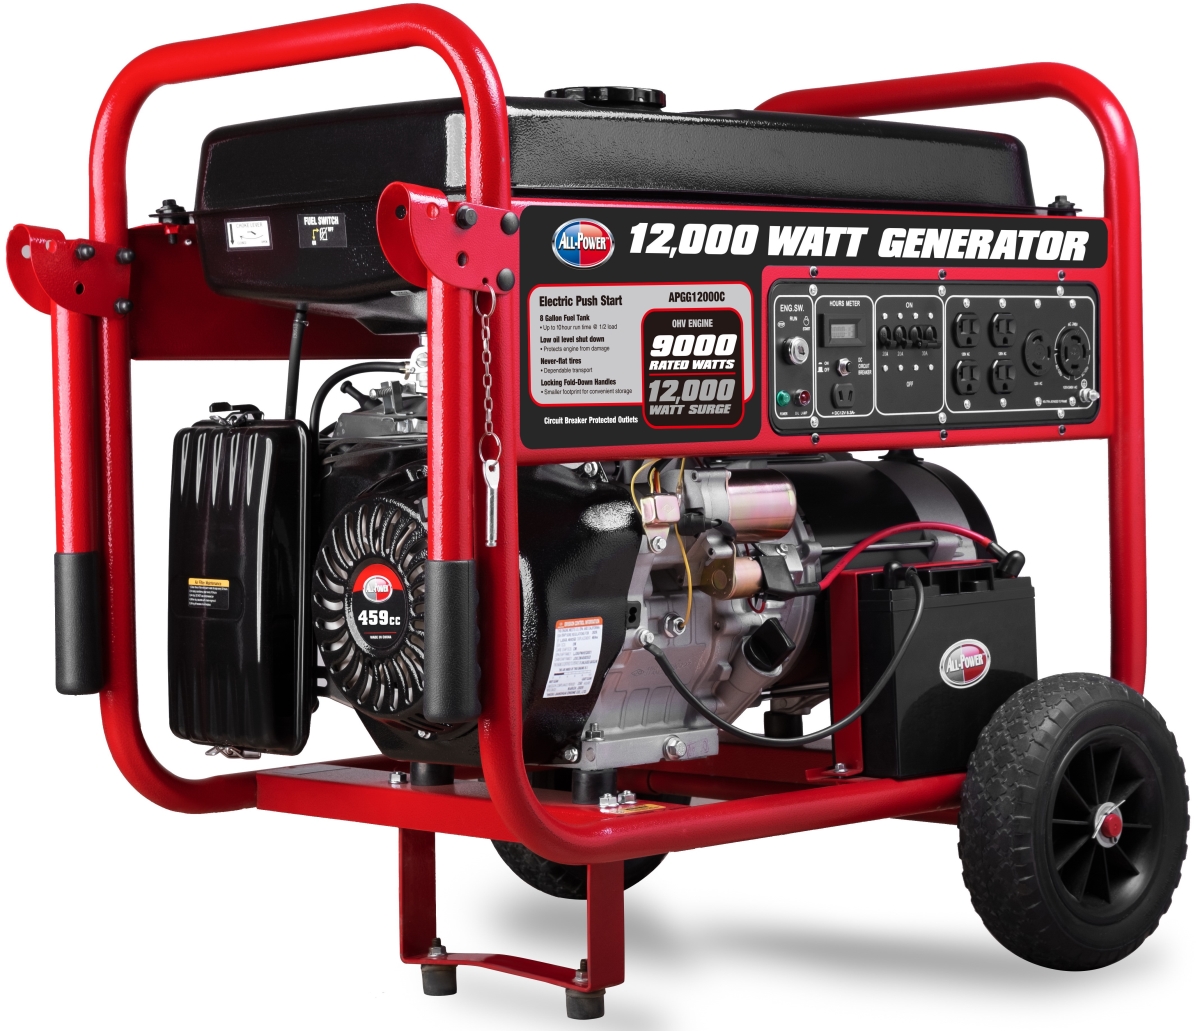 Picture of All-Power APGG12000 12 kVA 120-240V JD Engine 459cc Gasoline Generator